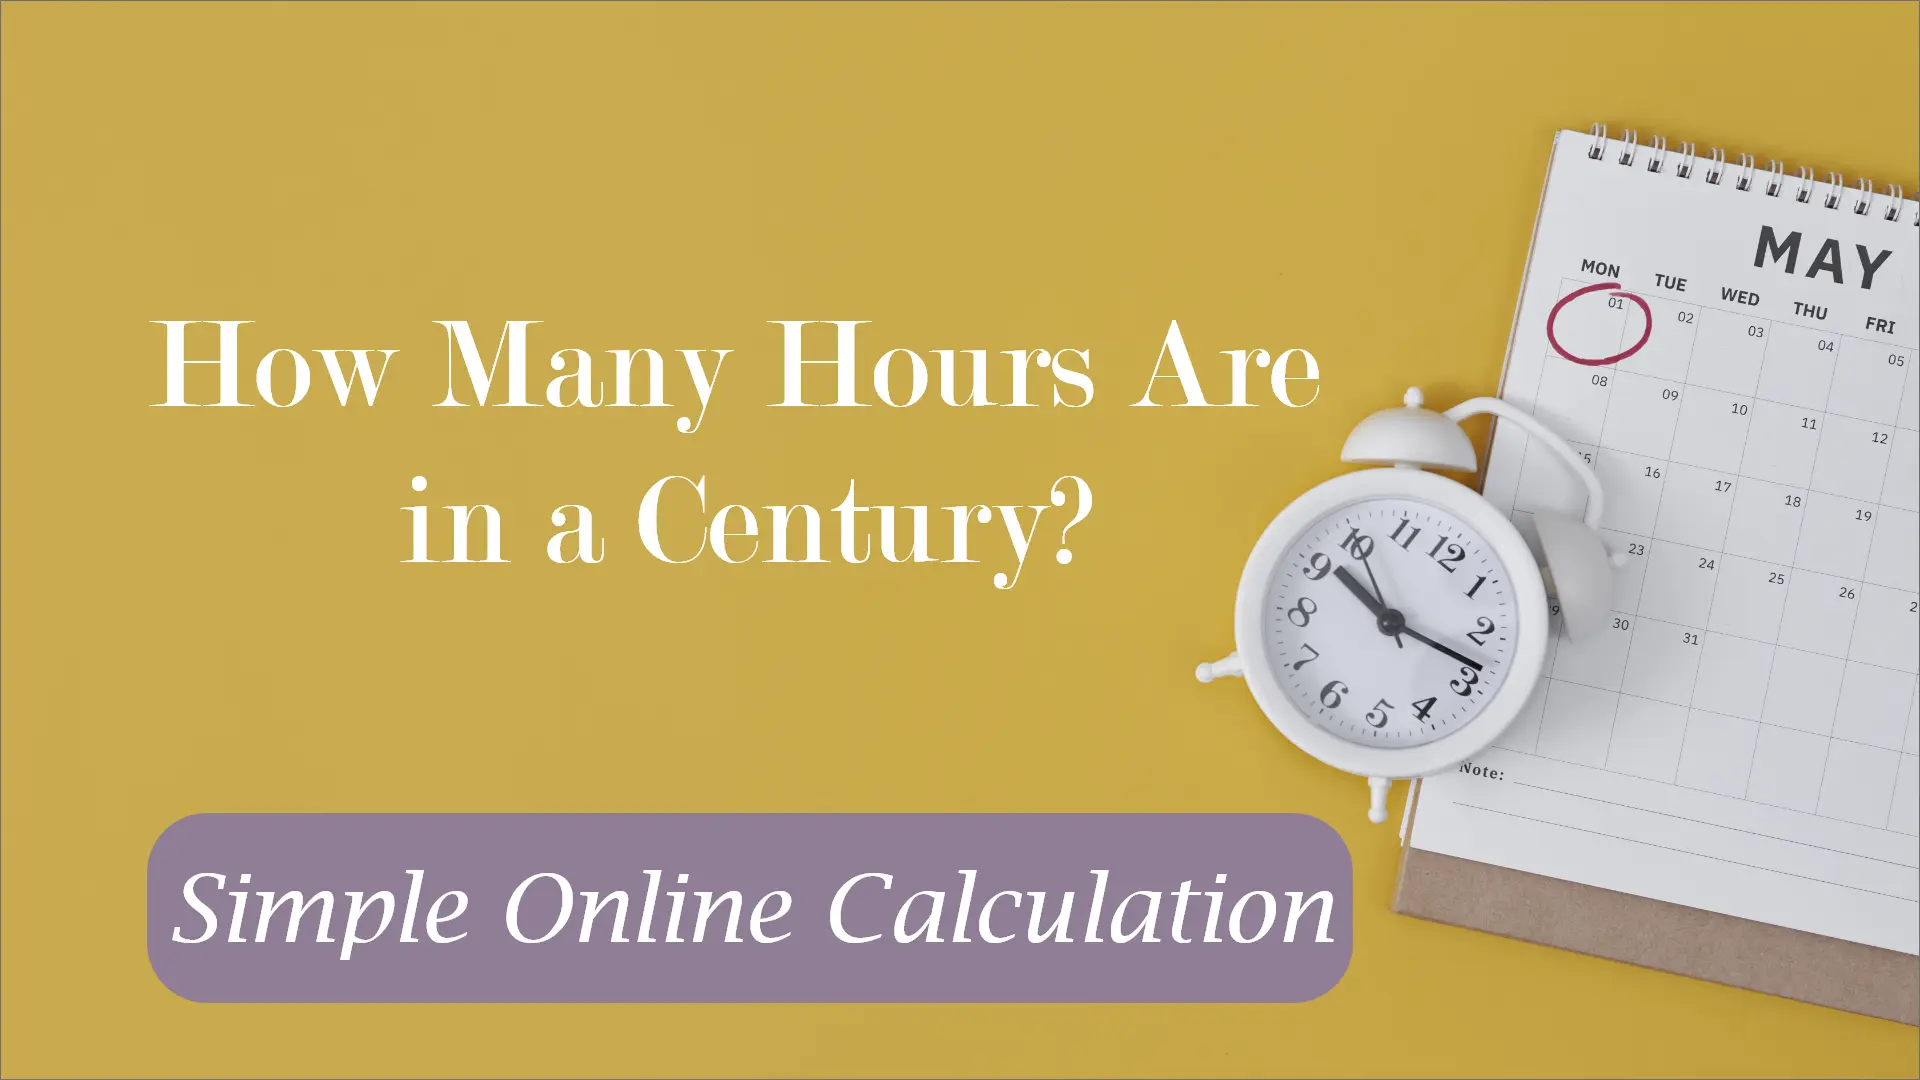 Explore How Many Hours in a Century